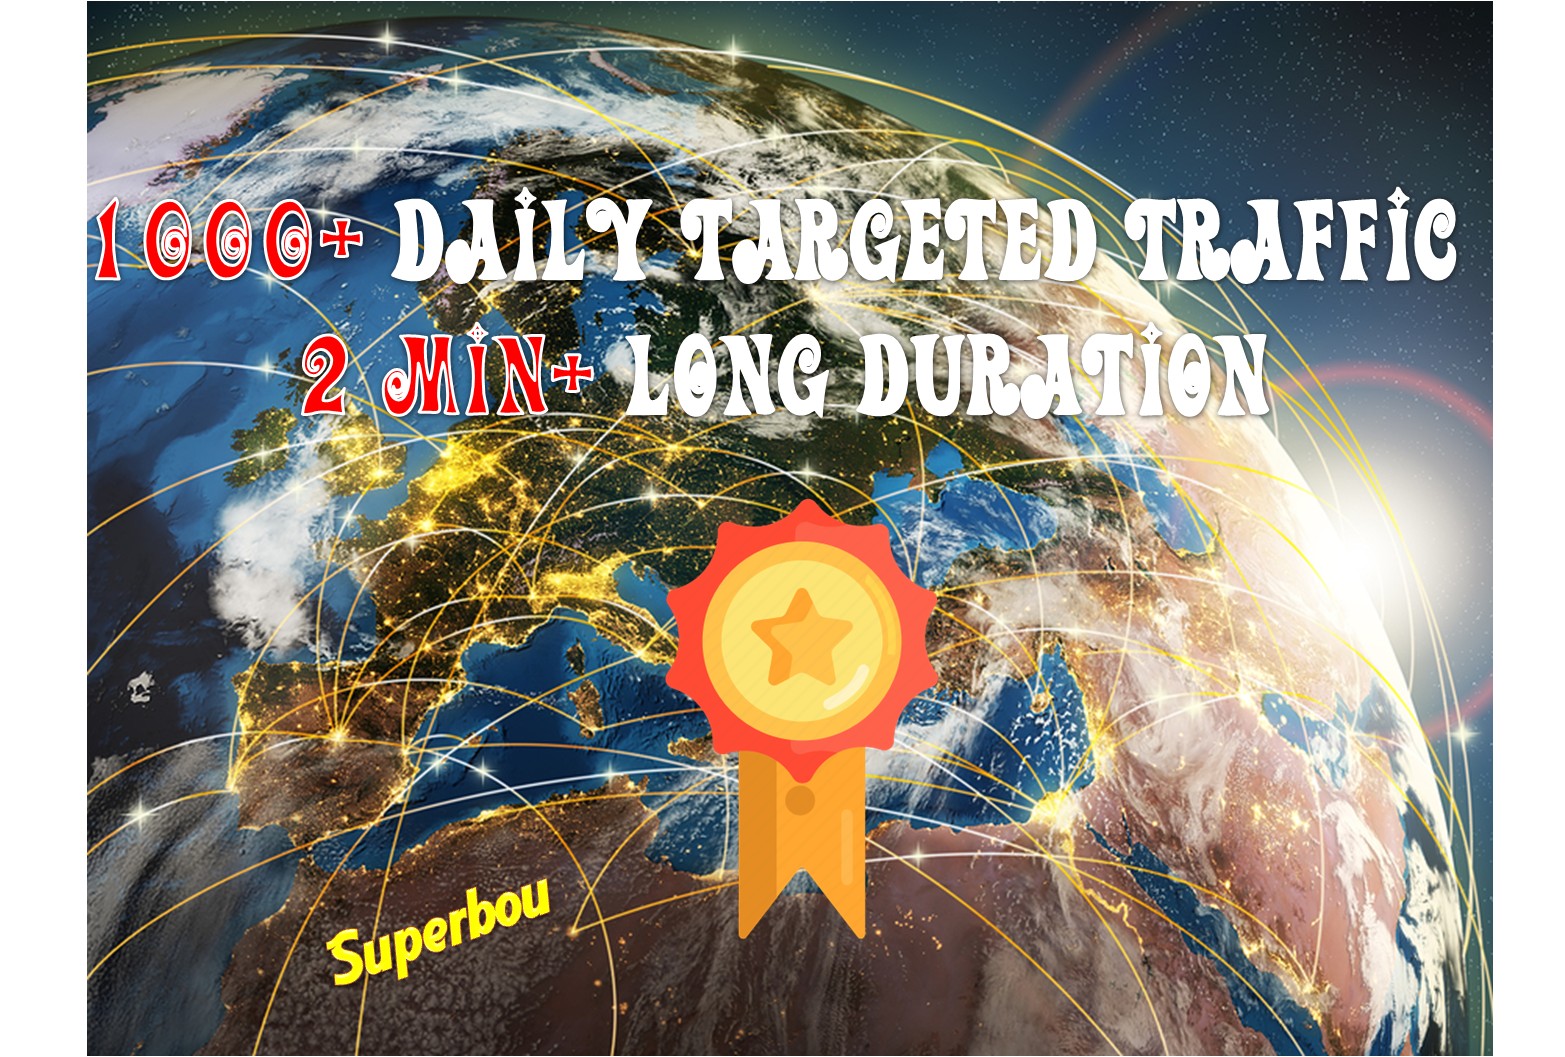 1000+ daily High Quality Keyword Targeted Traffic 2min+ Long duration, Low bounce rate for 30 days